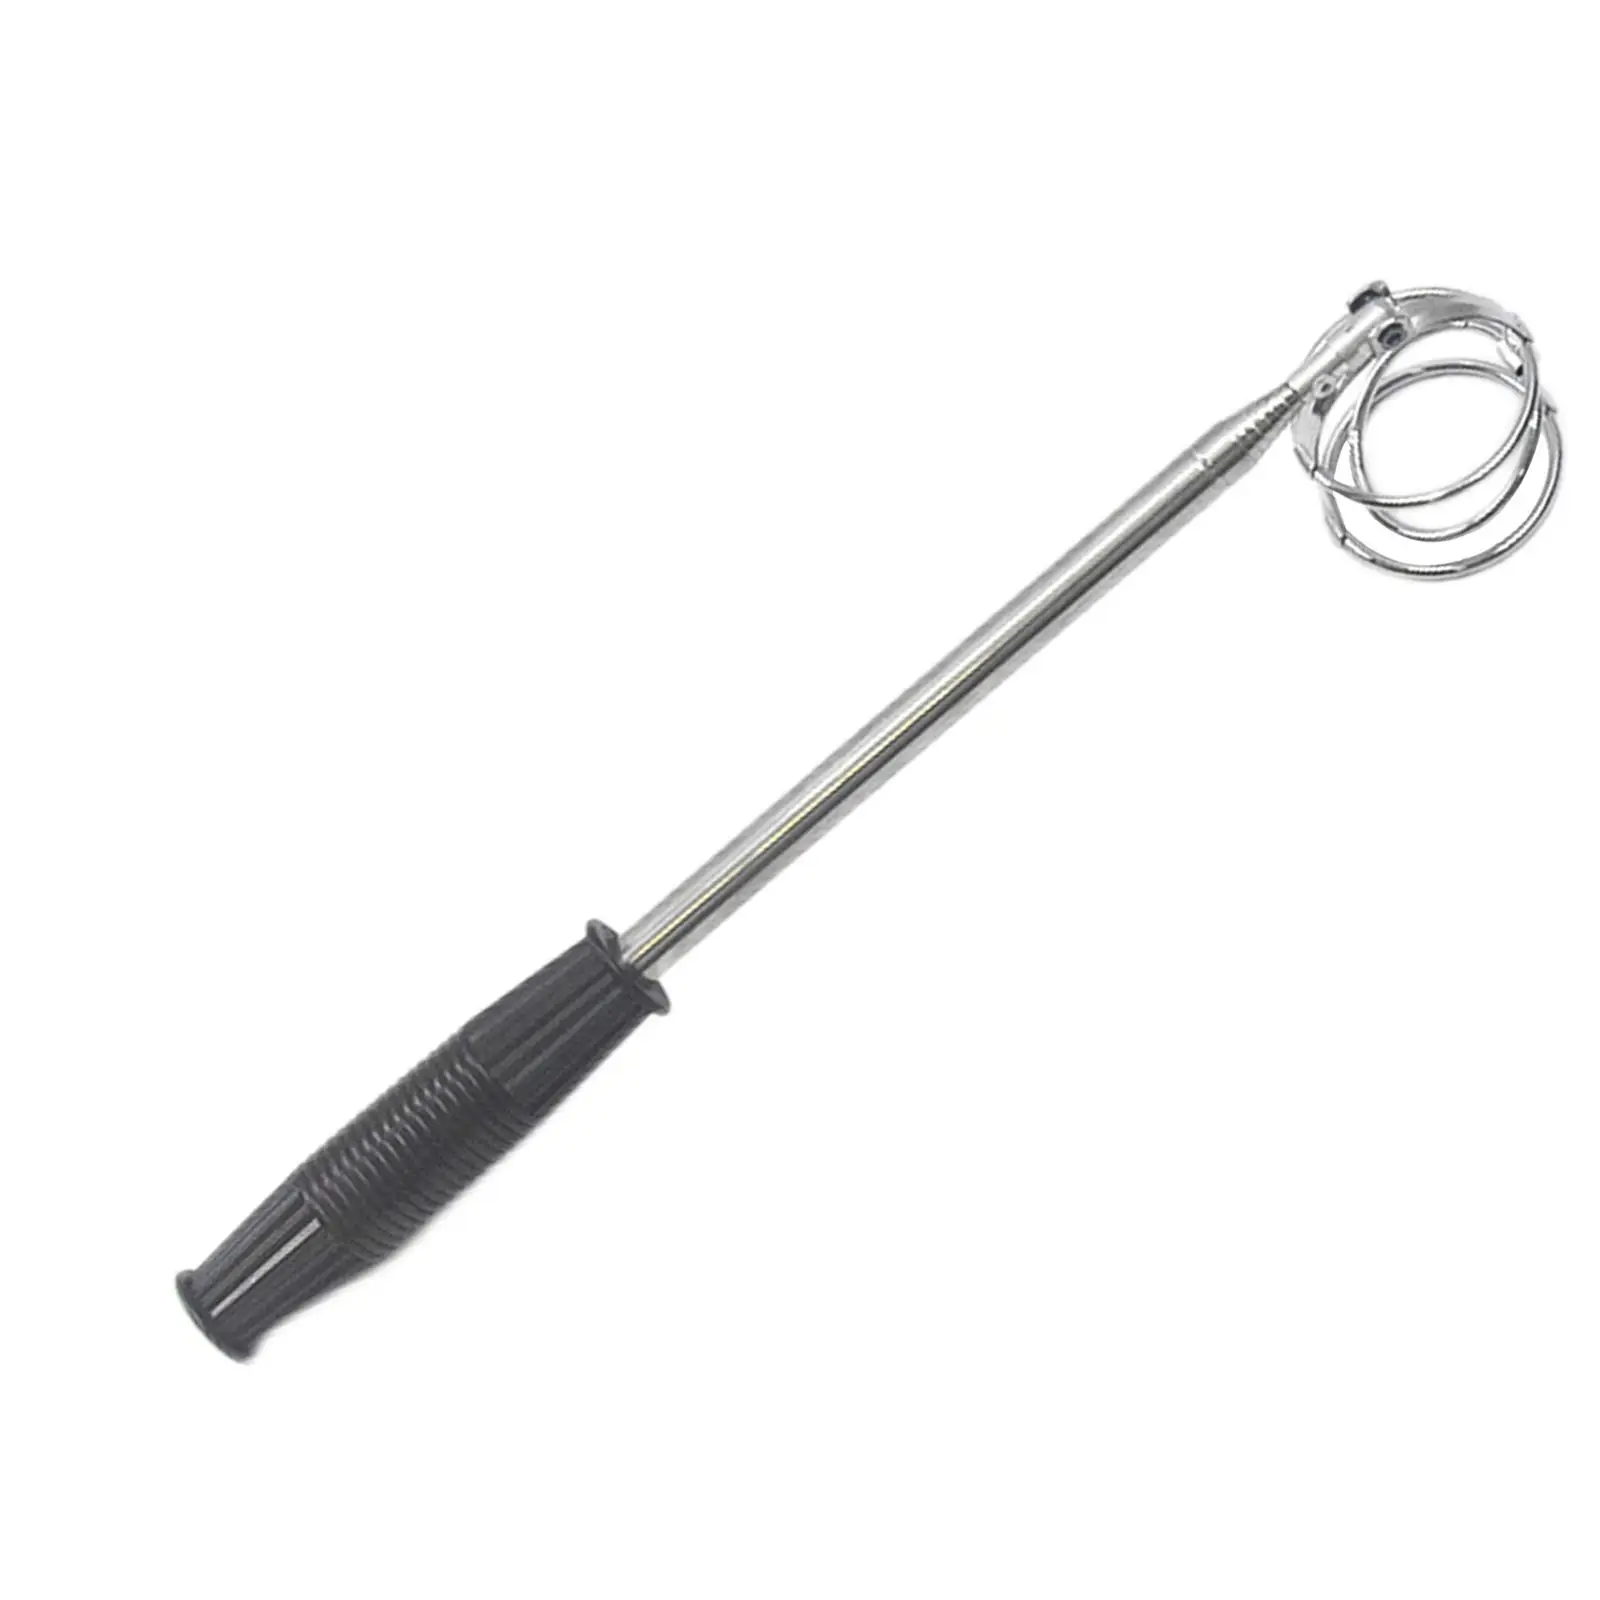 Portable Golf Ball Retriever Telescopic Golf Ball Pick up Shaft  Tool Picker 8 Section Stainless Steel for Outdoor Water